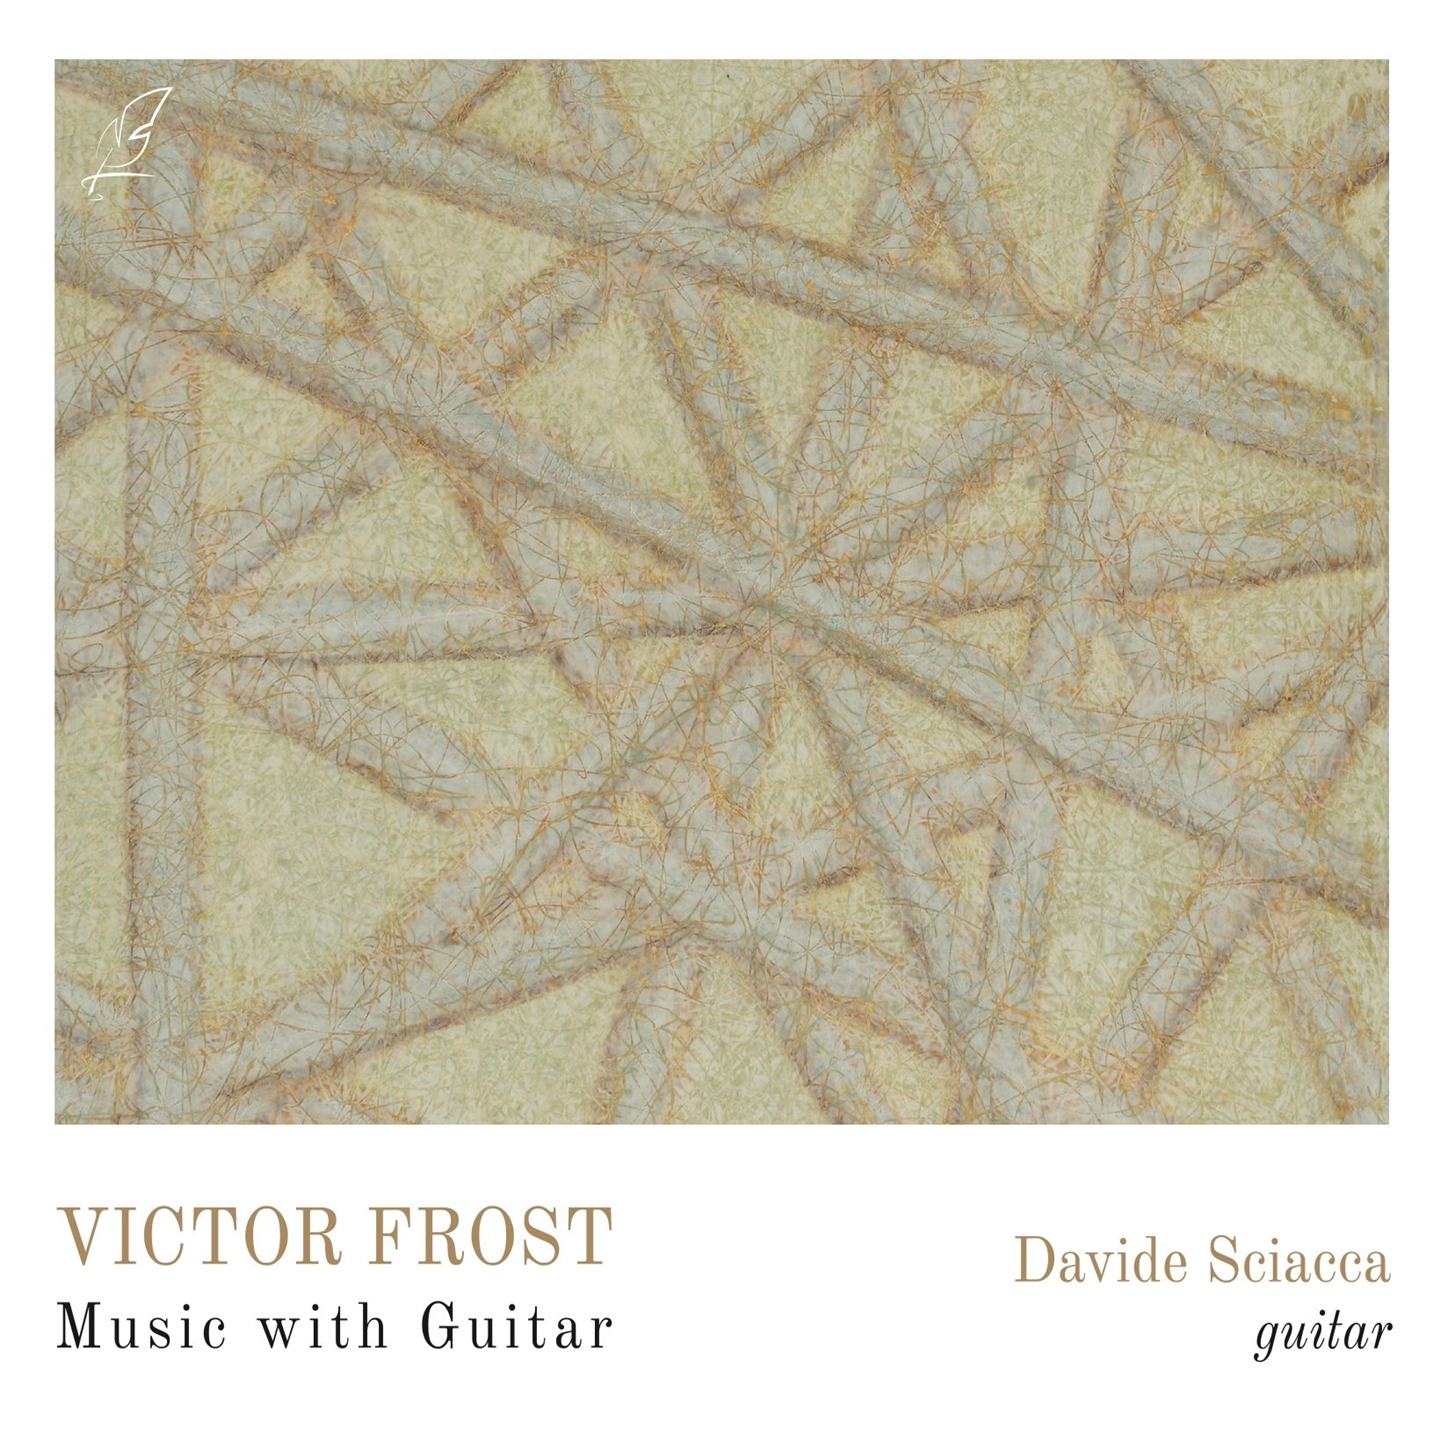 FROST: MUSIC WITH GUITAR